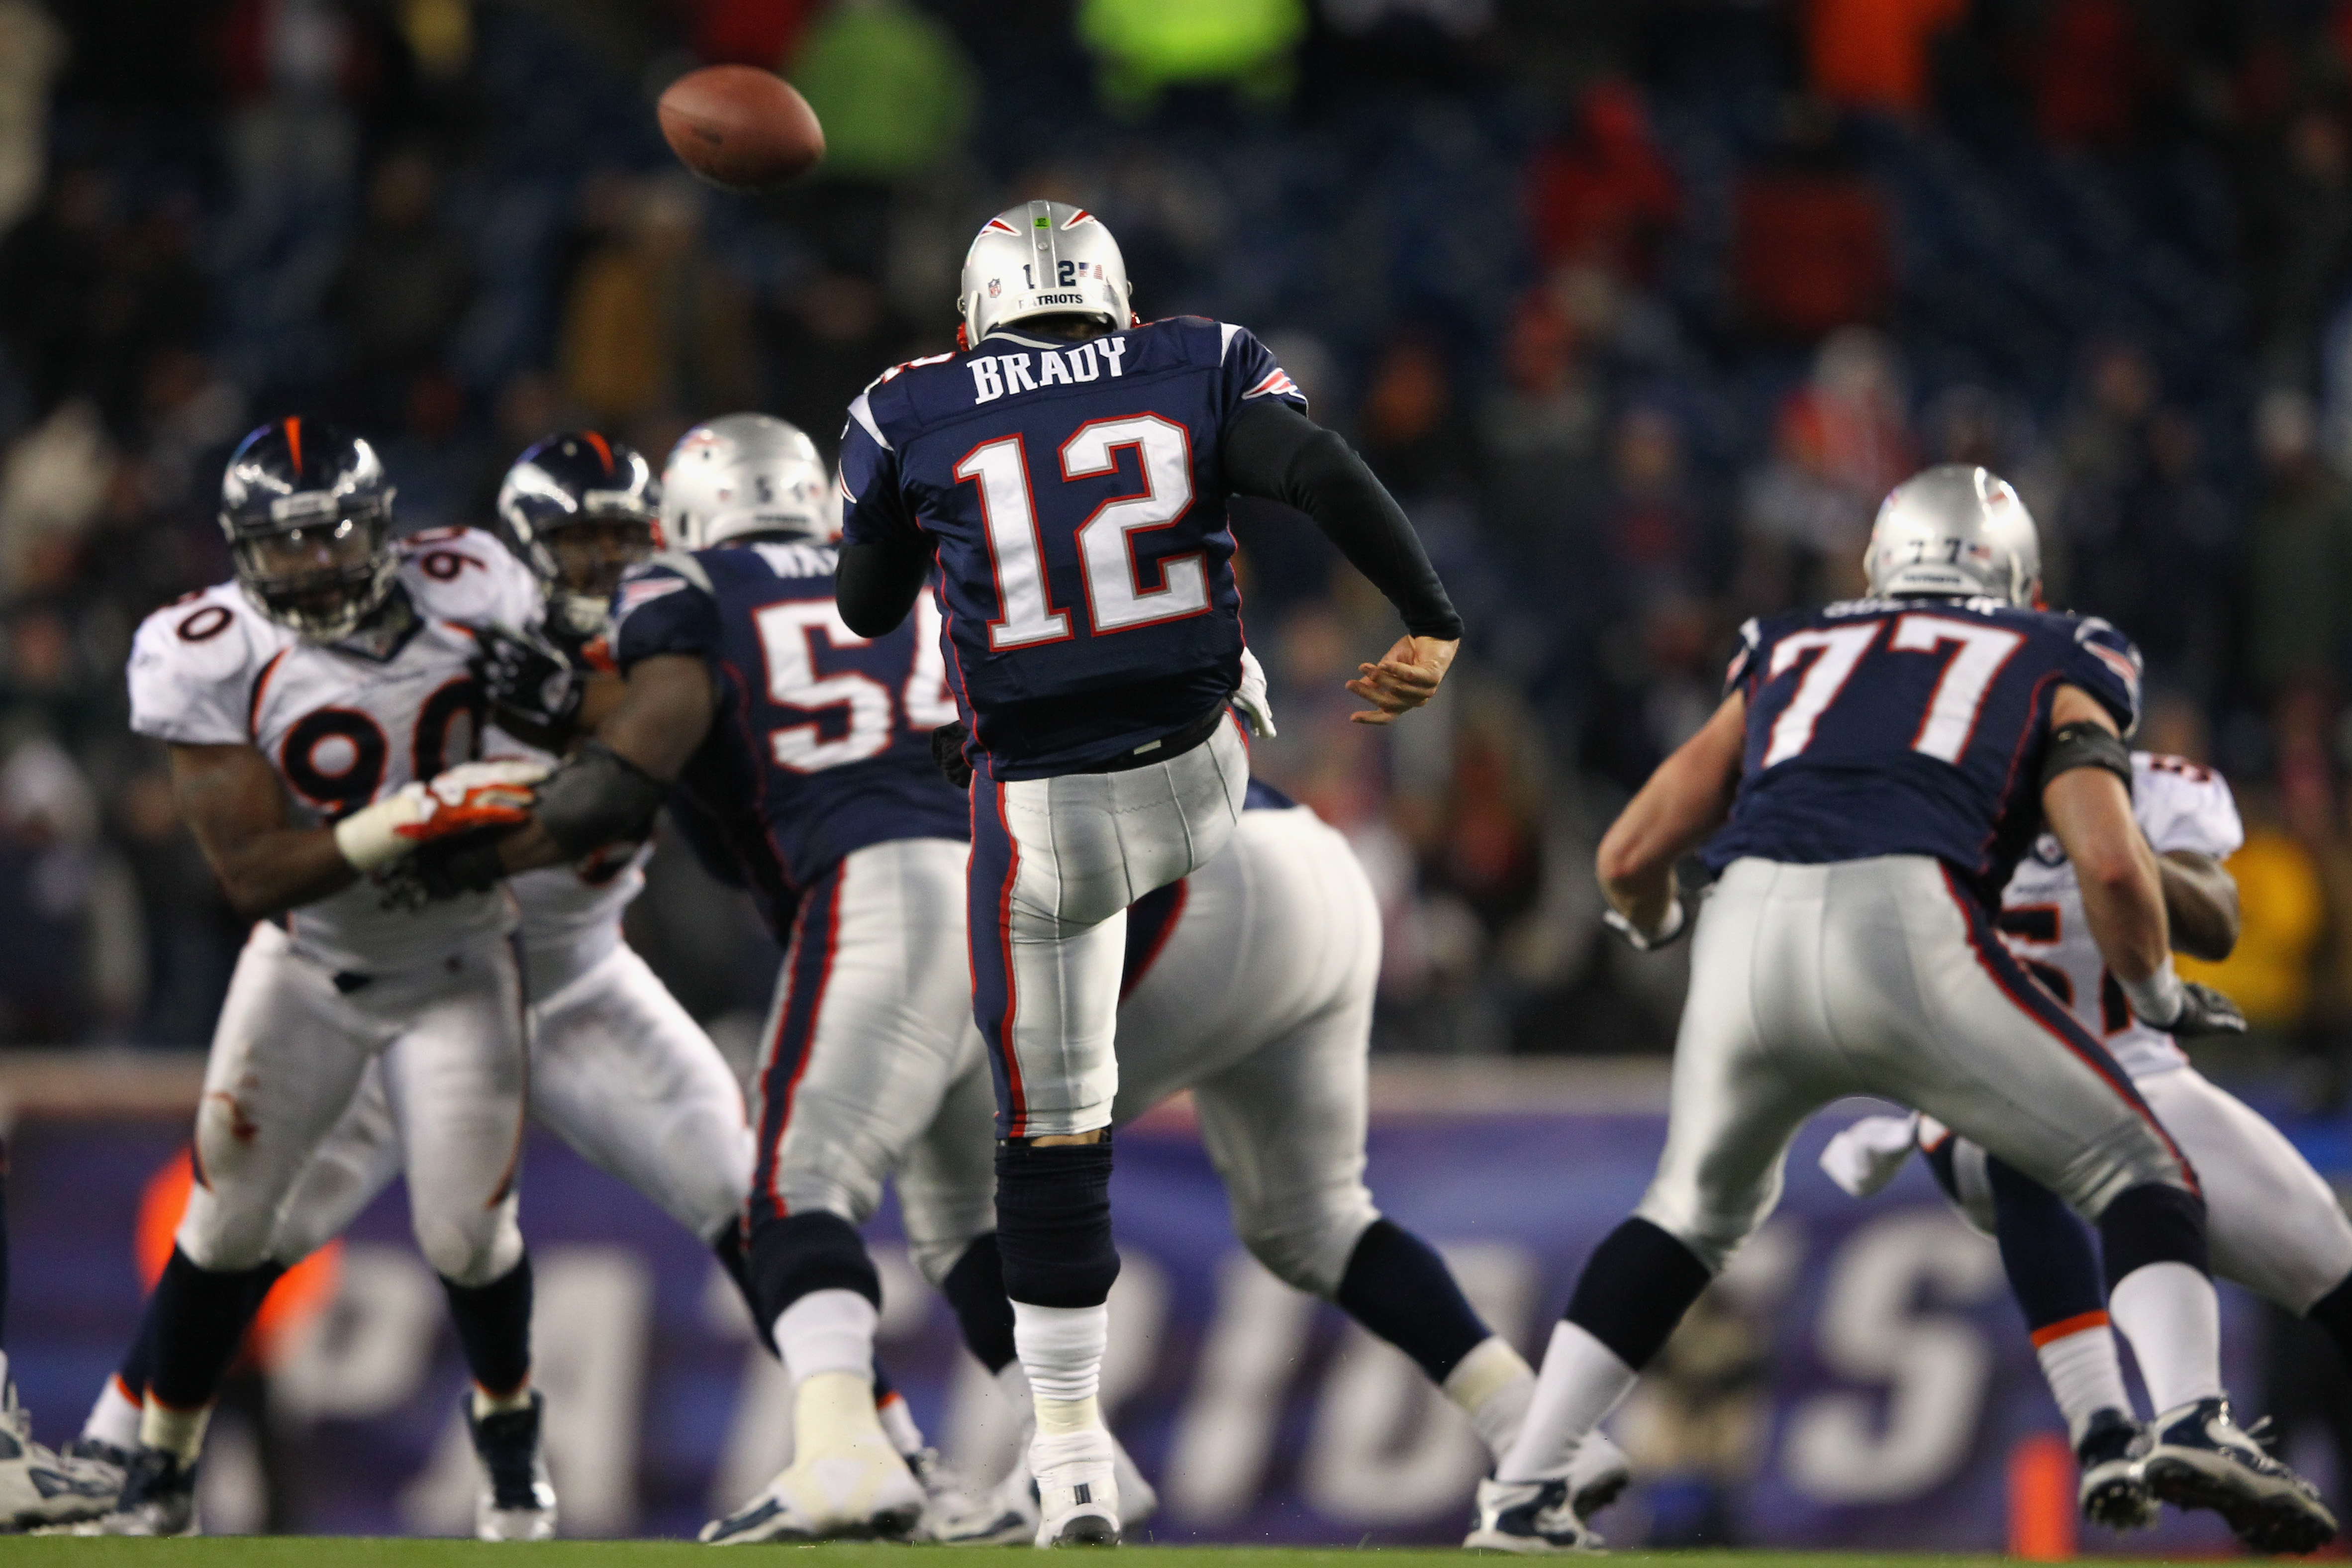 Tom Brady of the New England Patriots punts the ball in the fourth quarter against the Denver Broncos during their AFC Divisional Playoff Game at Gillette Stadium on January 14, 2012 in Foxboro, Massachusetts. (Photo by Al Bello/Getty Images)